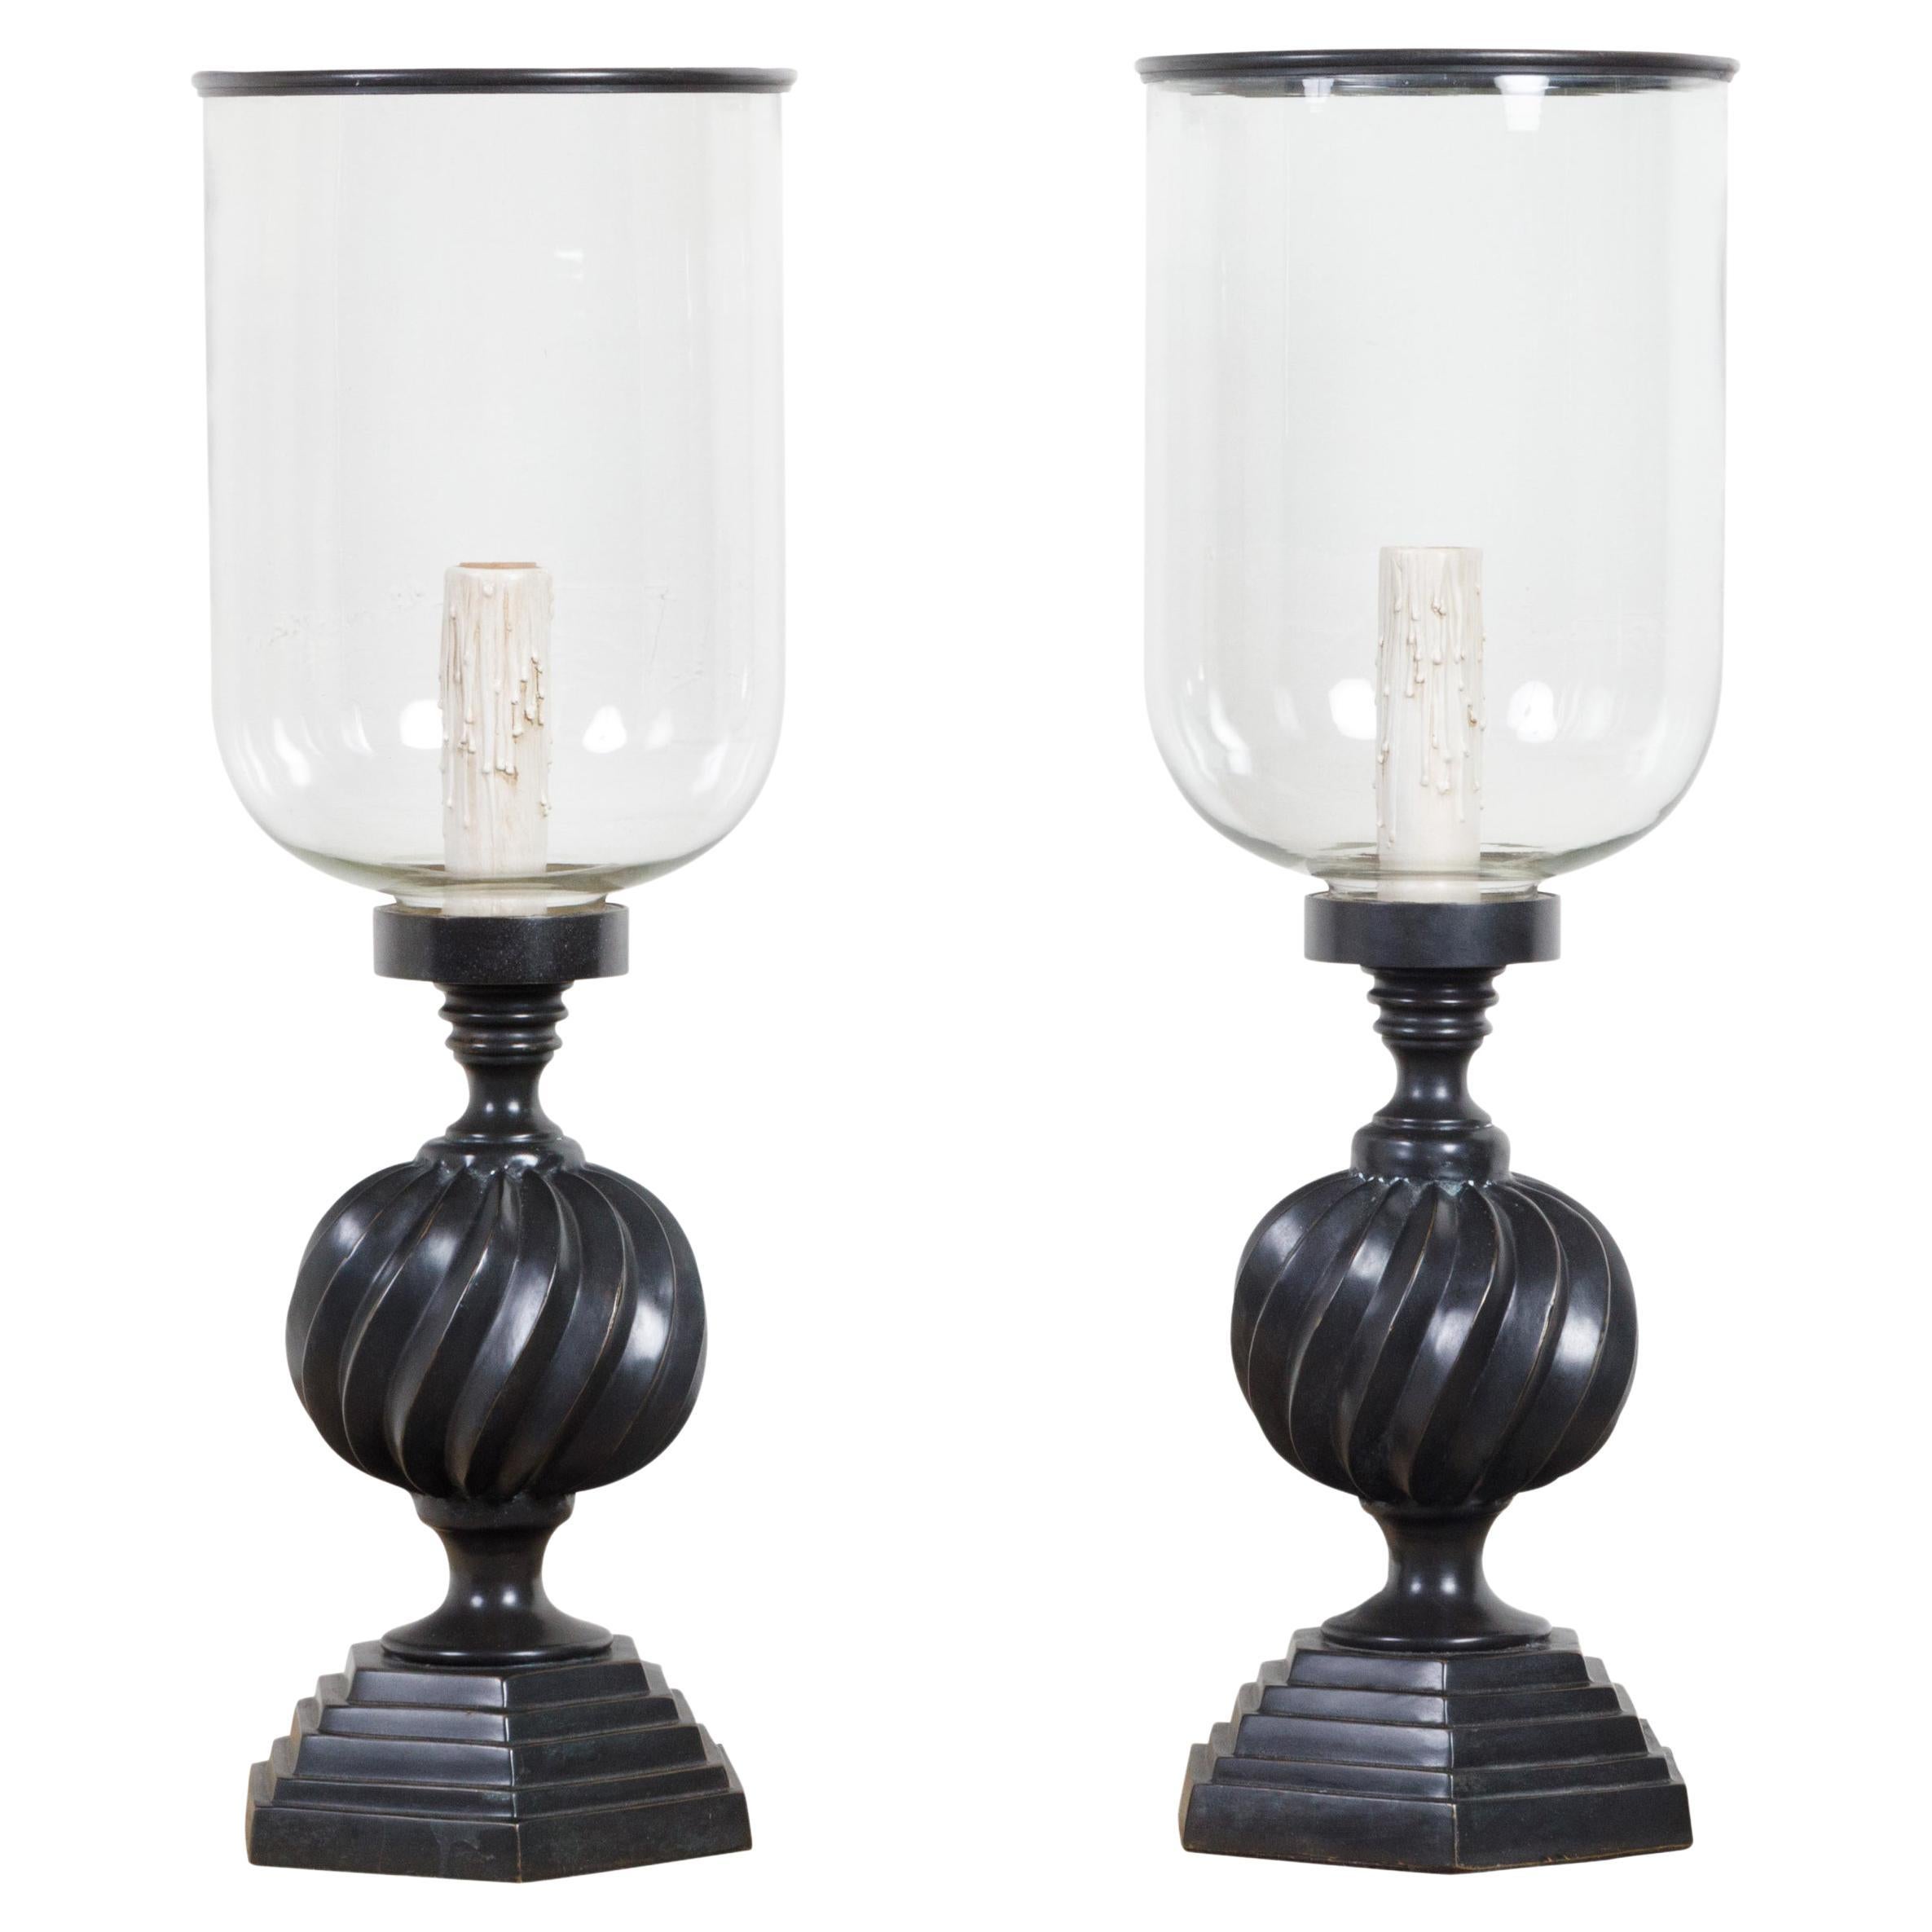 Pair of French Midcentury Bronze Hurricane Single Light Lamps with Stepped Bases